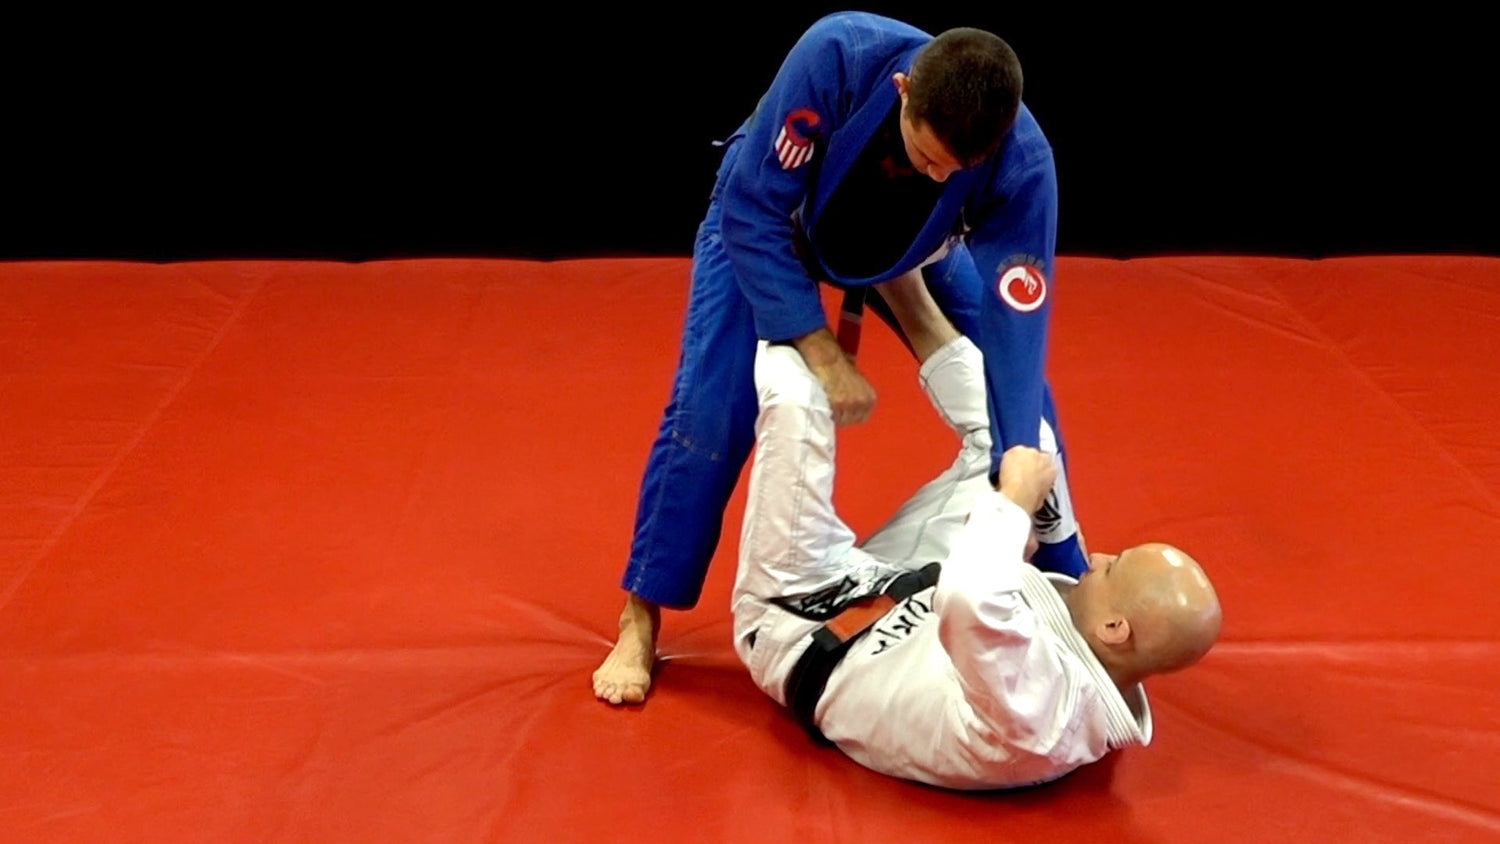 Cross Grip Guard & the Old Man Sweep with Marcelo Cohen (On Demand) - Budovideos Inc